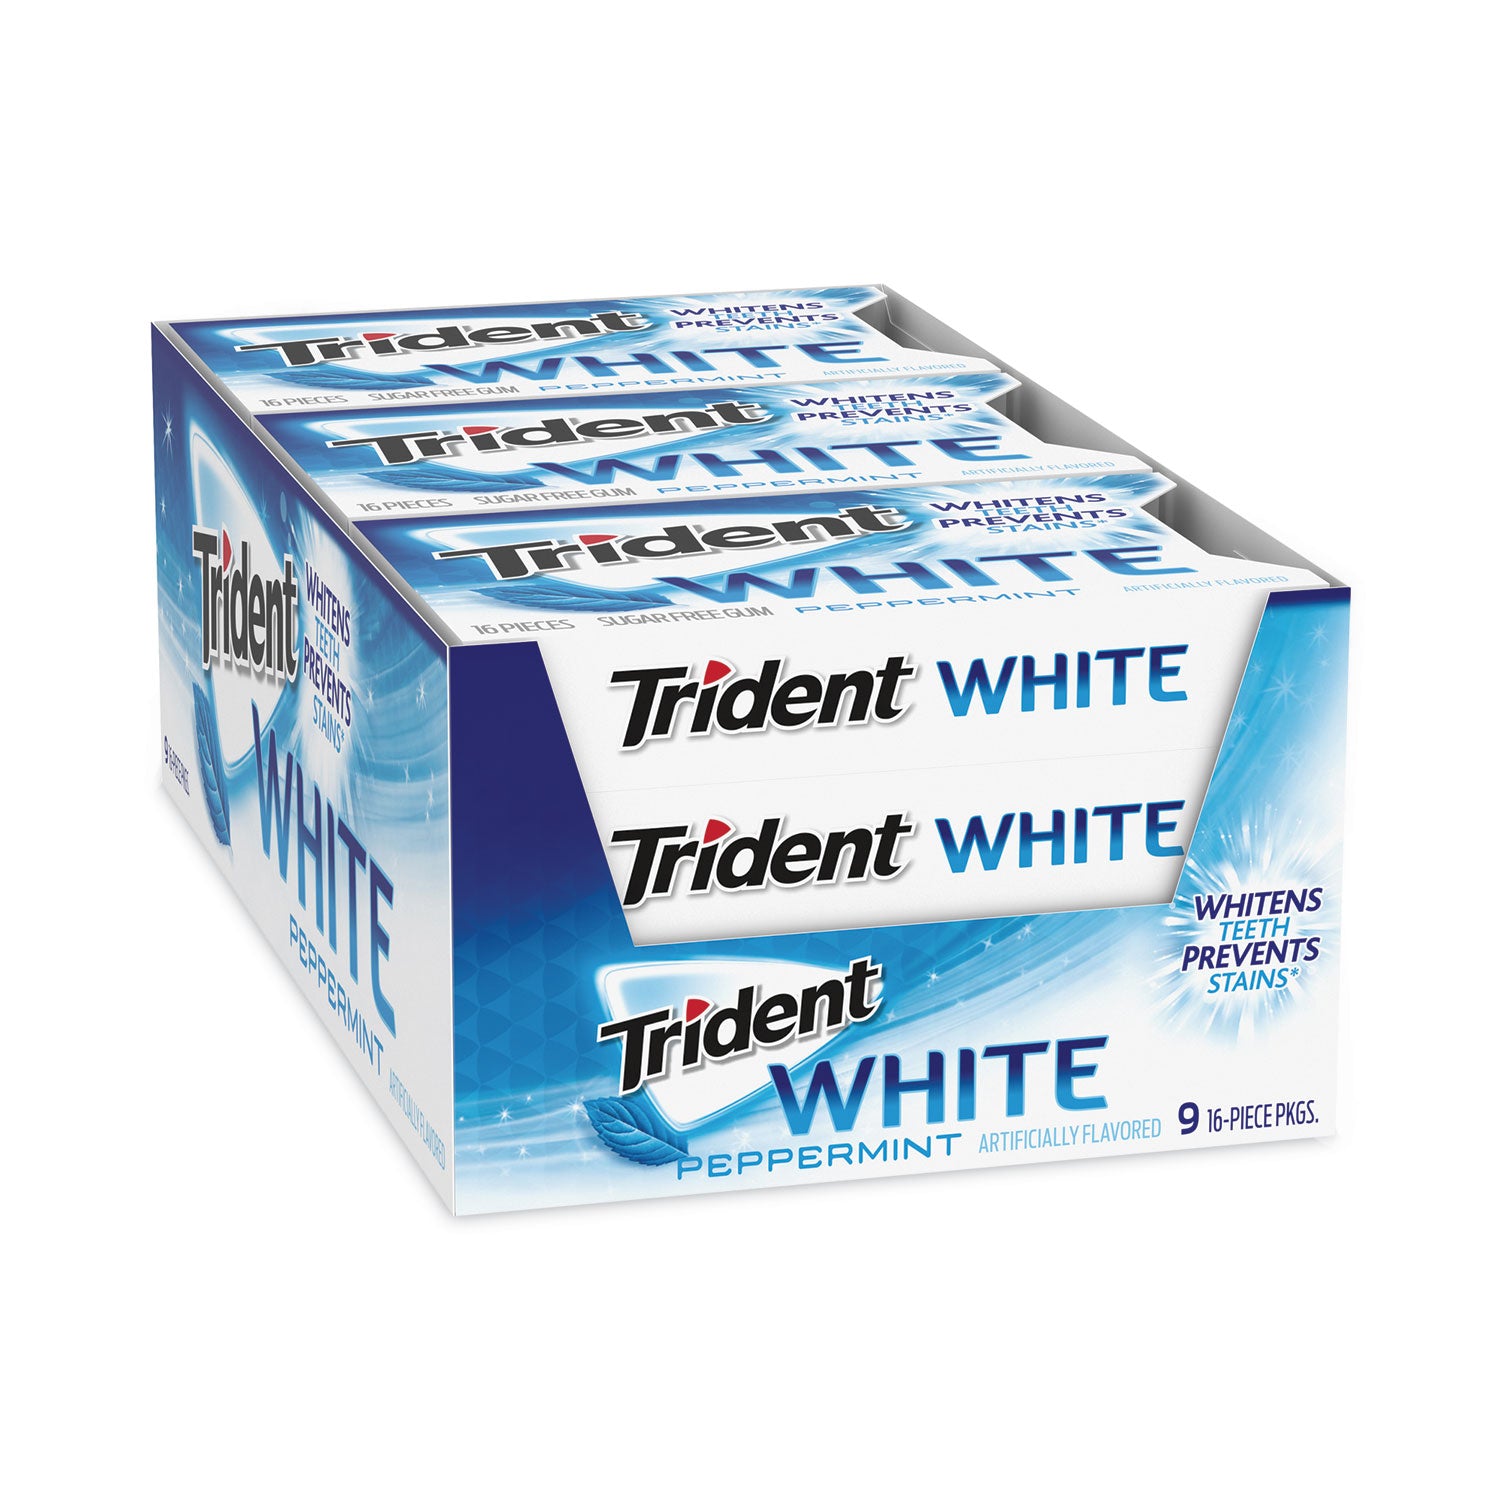 sugar-free-gum-white-peppermint16-pieces-pack-9-packs-carton-ships-in-1-3-business-days_grr20902451 - 2